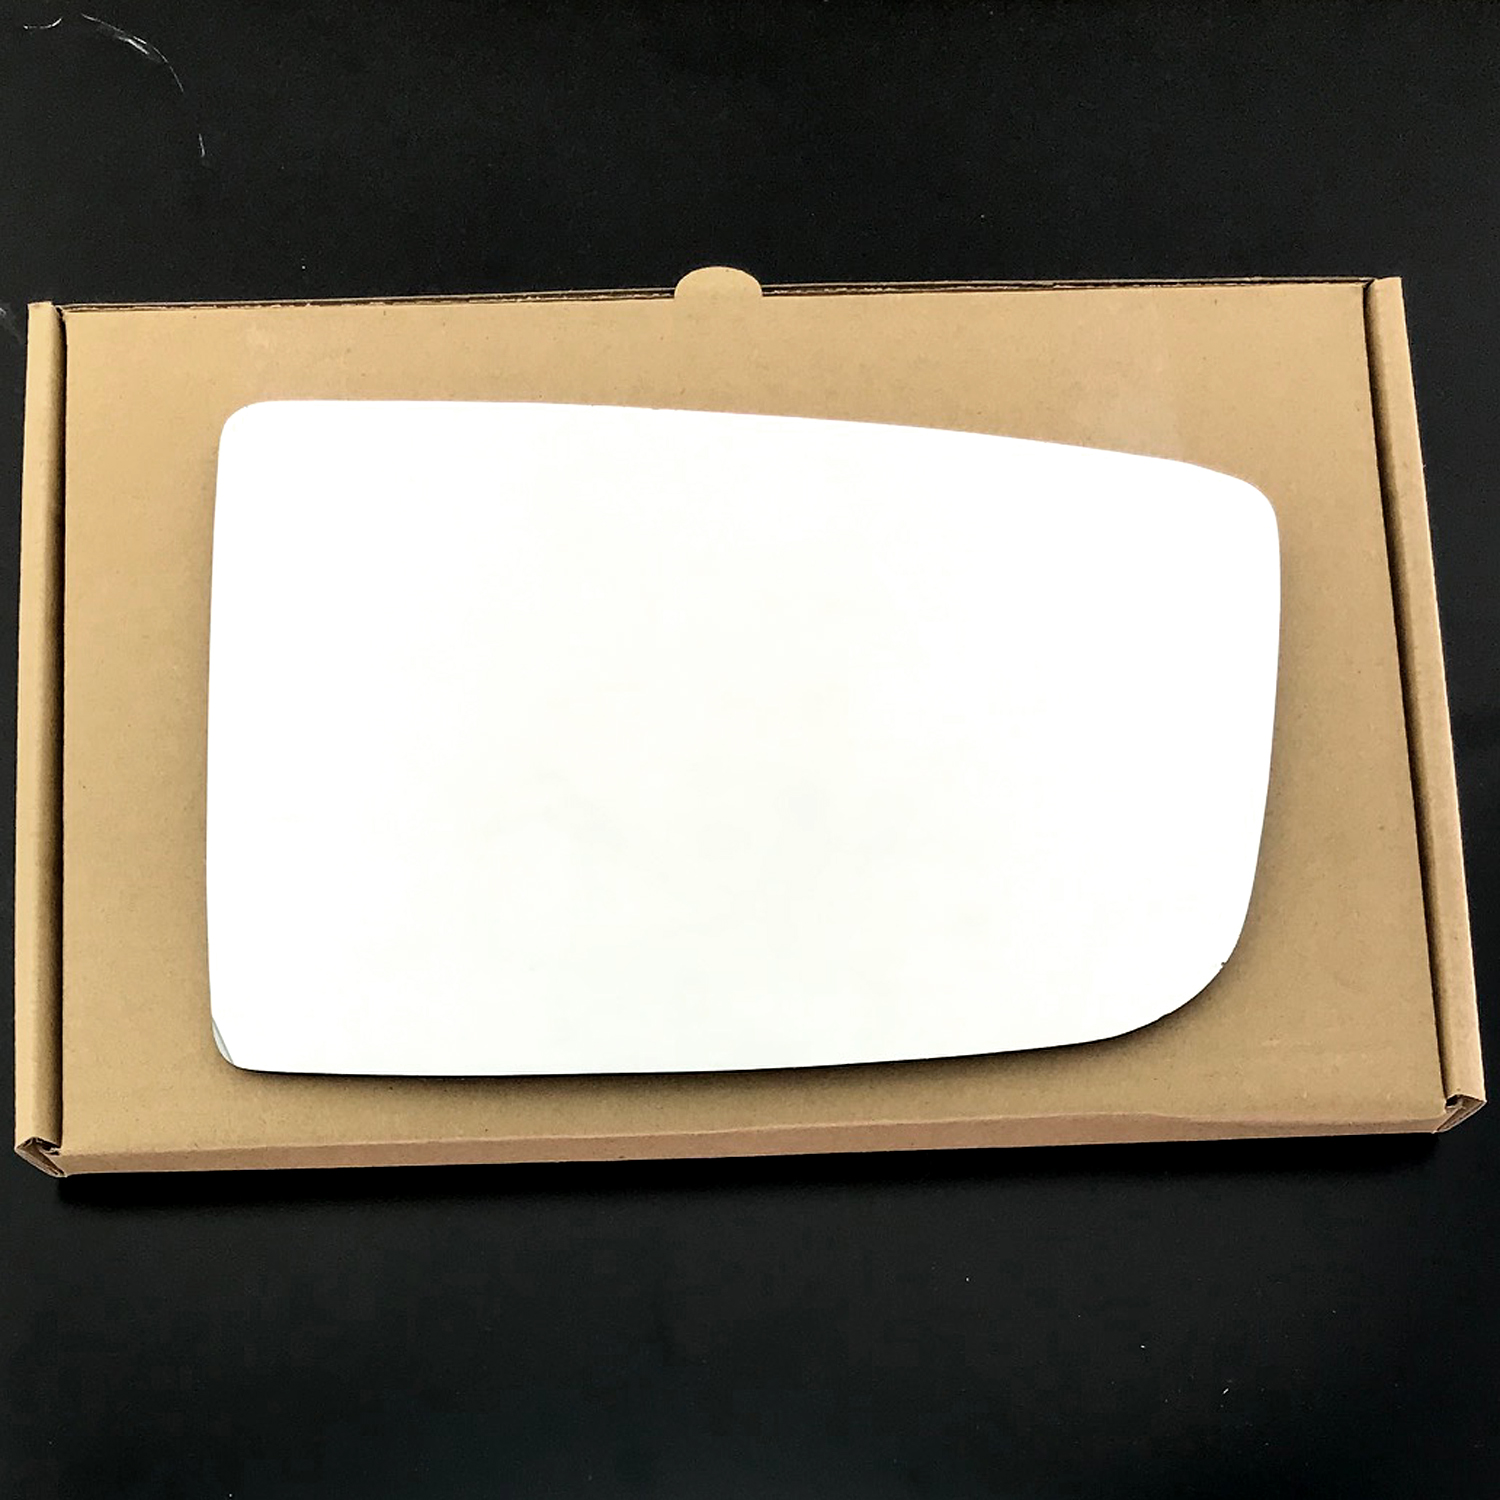 Volkswagen Crafter  Wing Mirror Glass RIGHT HAND ( UK Driver Side ) 2007 to 2010 ( Without Indicator ) – Convex Wing Mirror